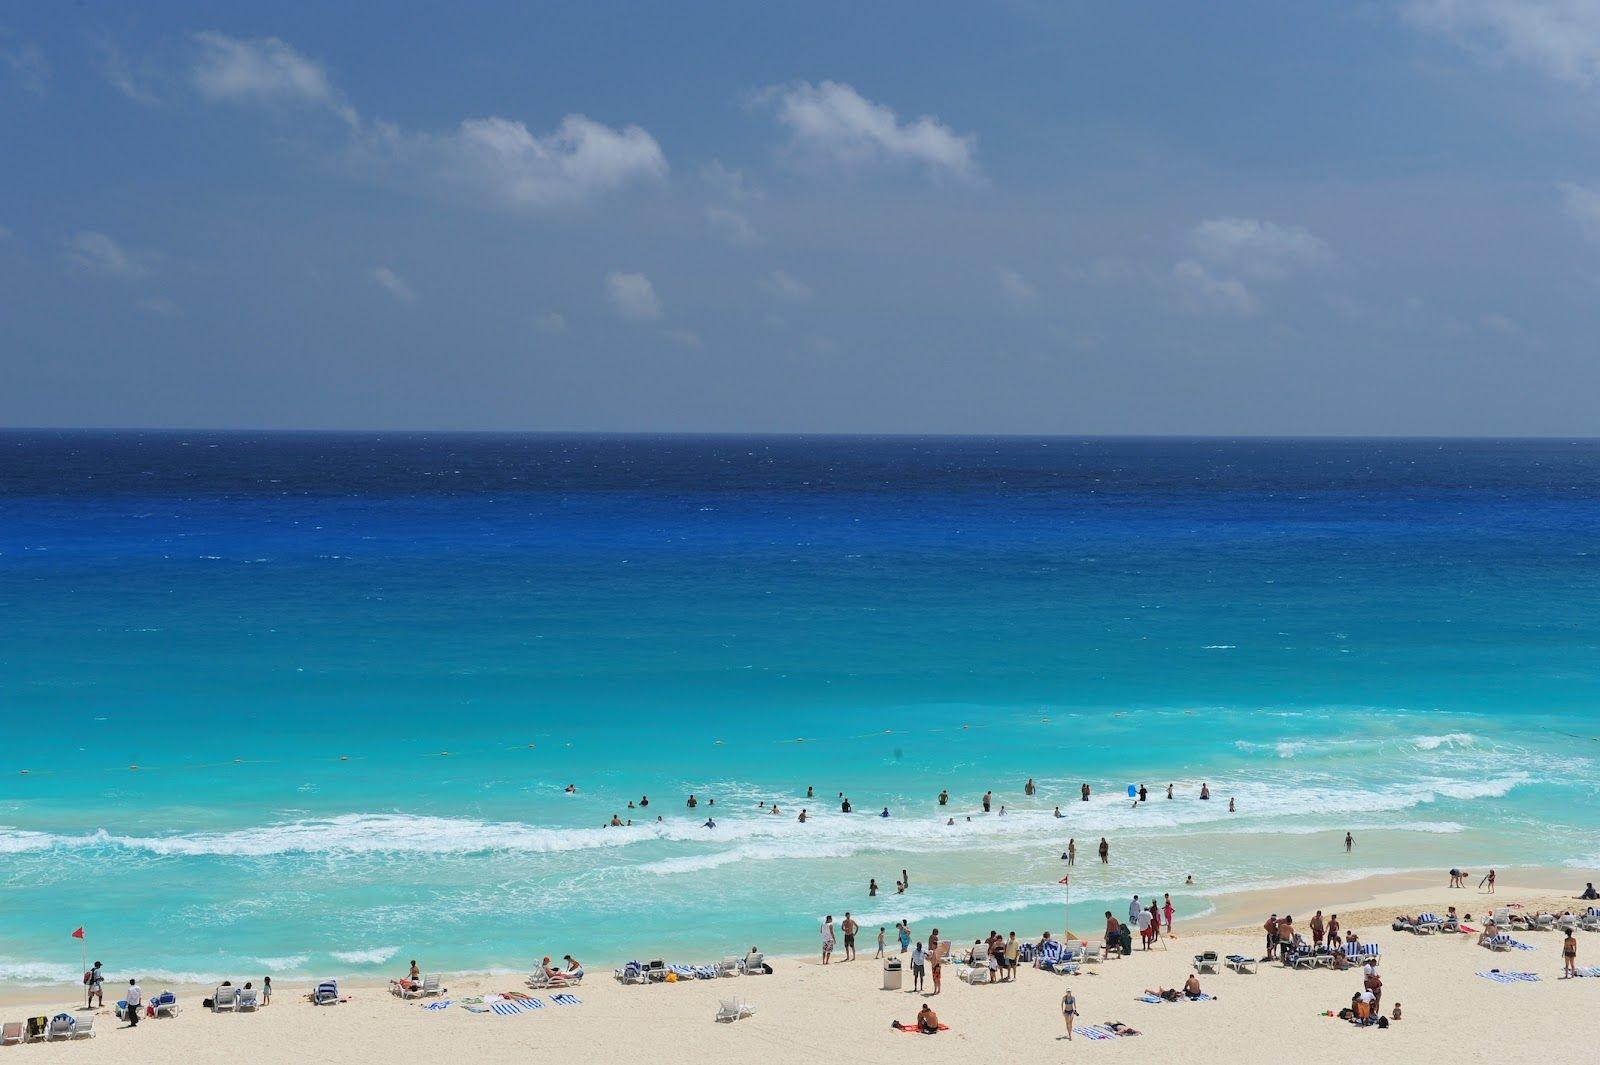 Cancun Wallpapers High Quality